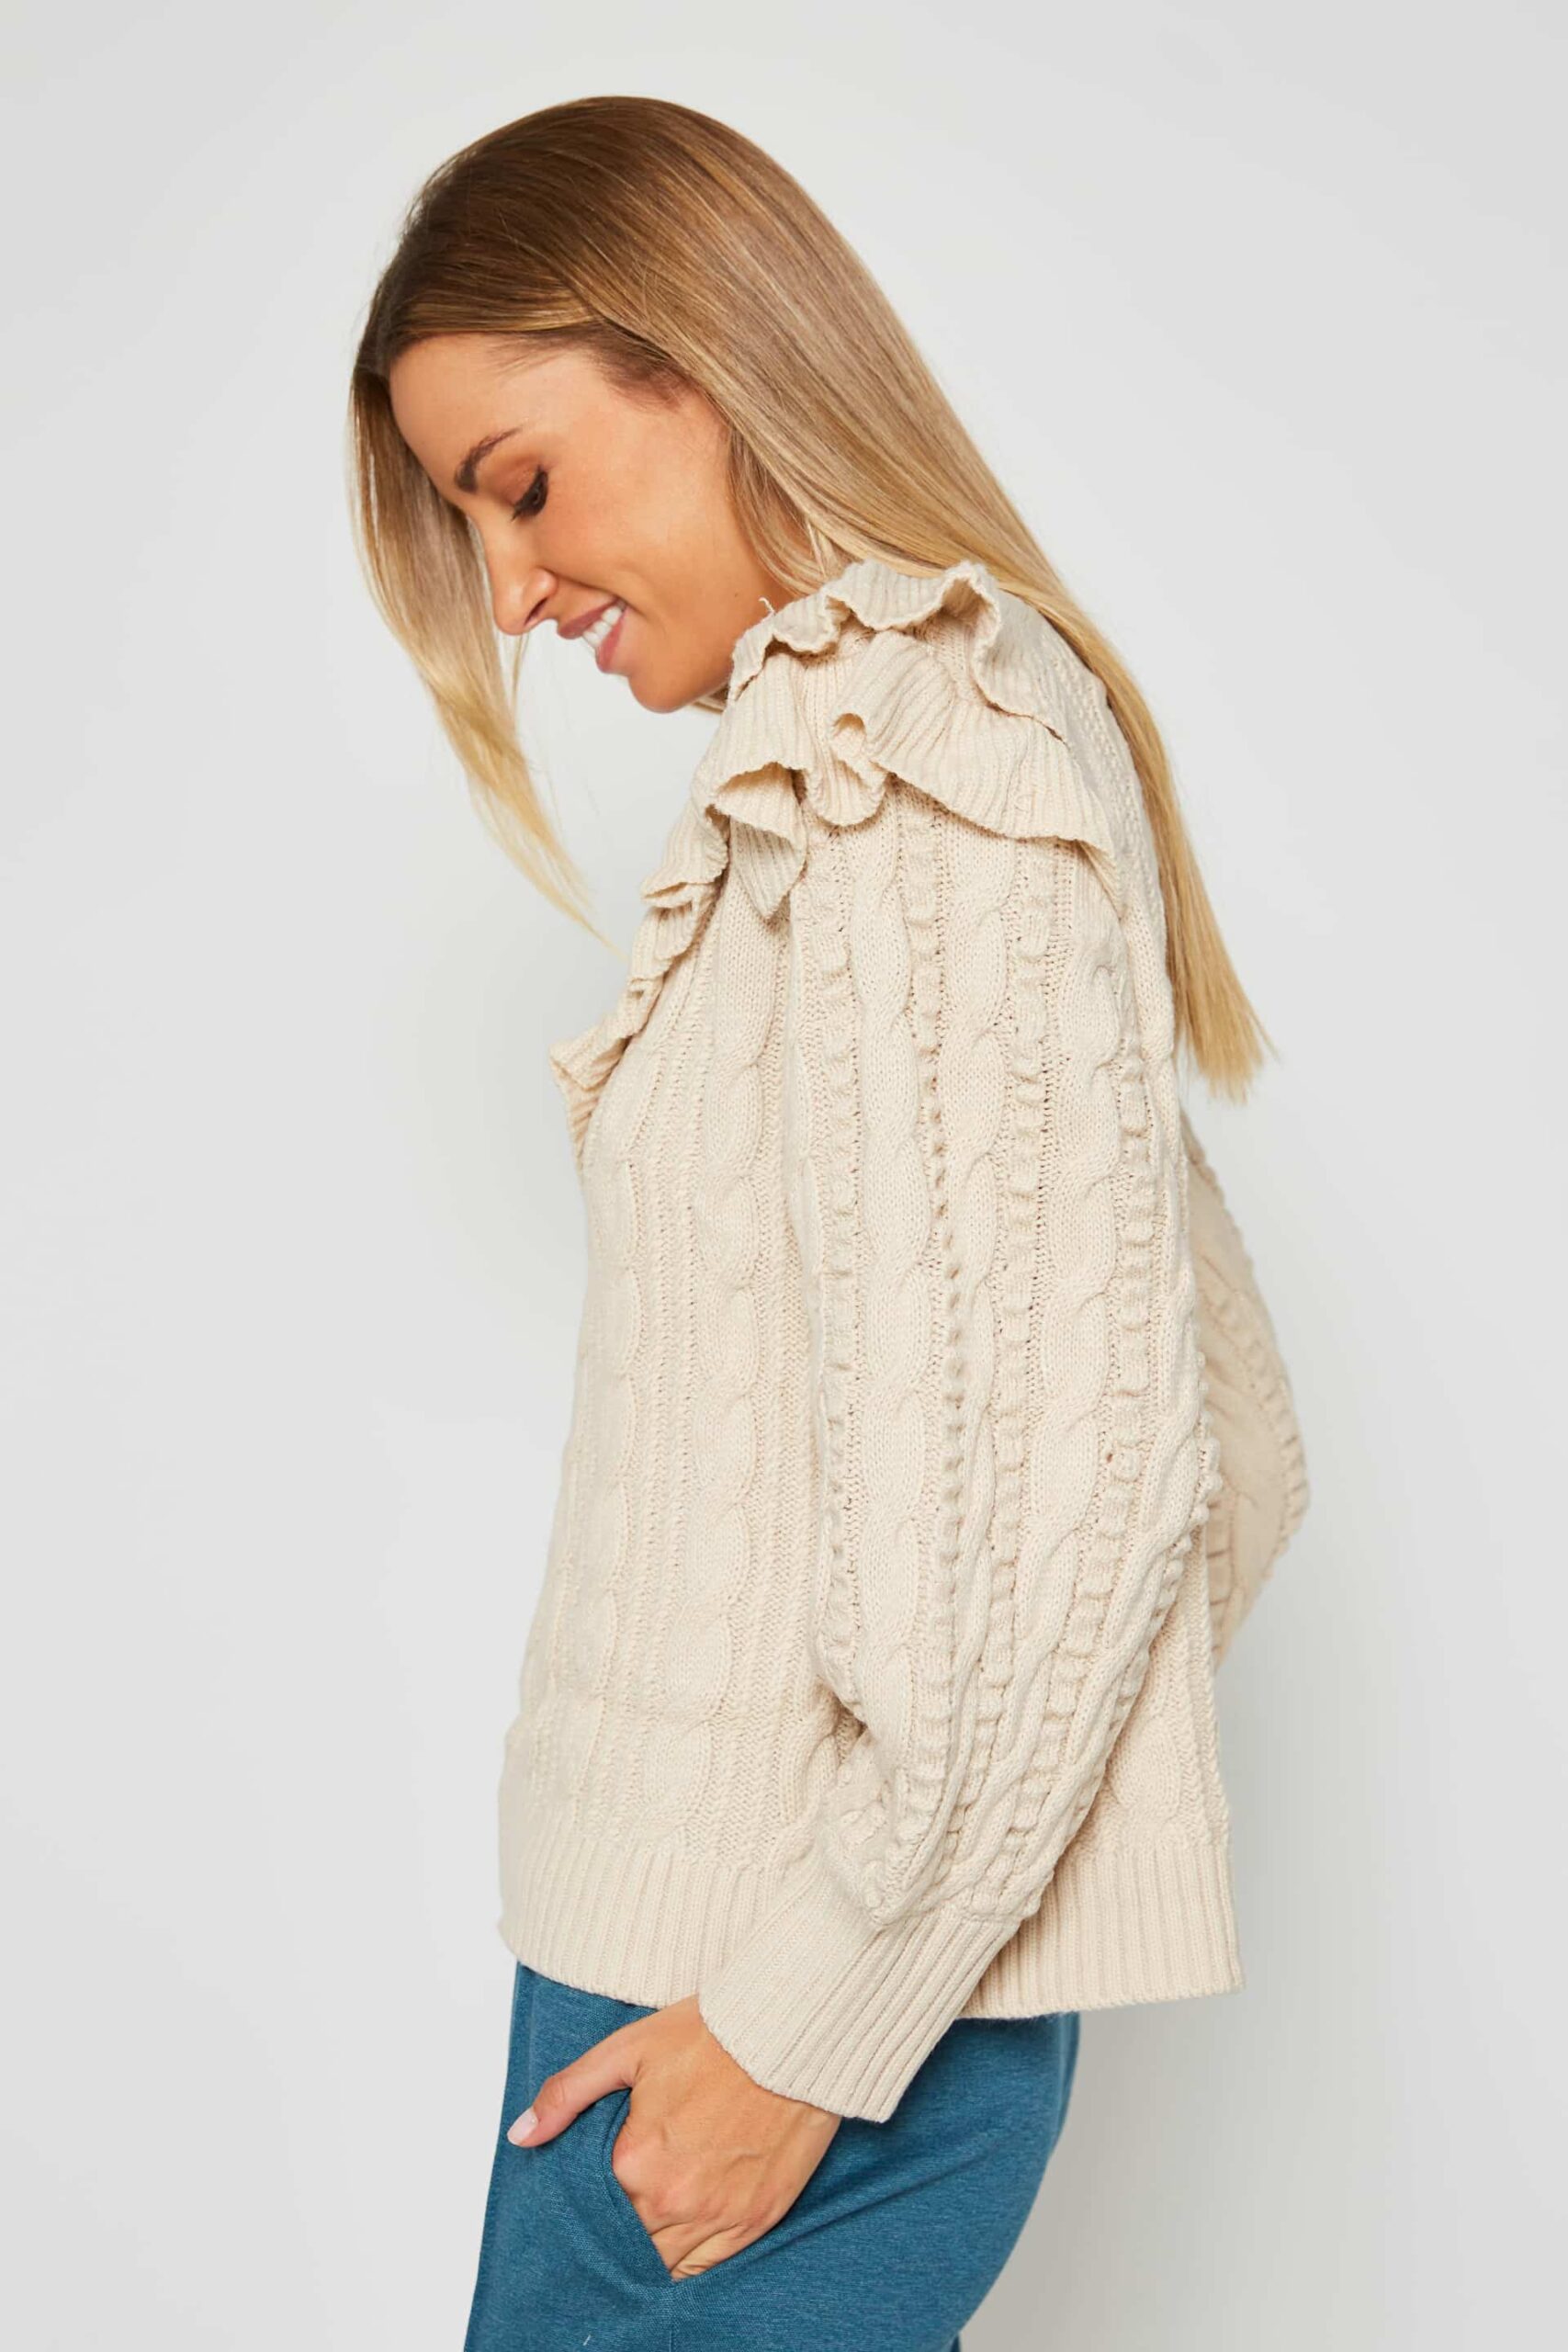 Braided sweater with ruffles